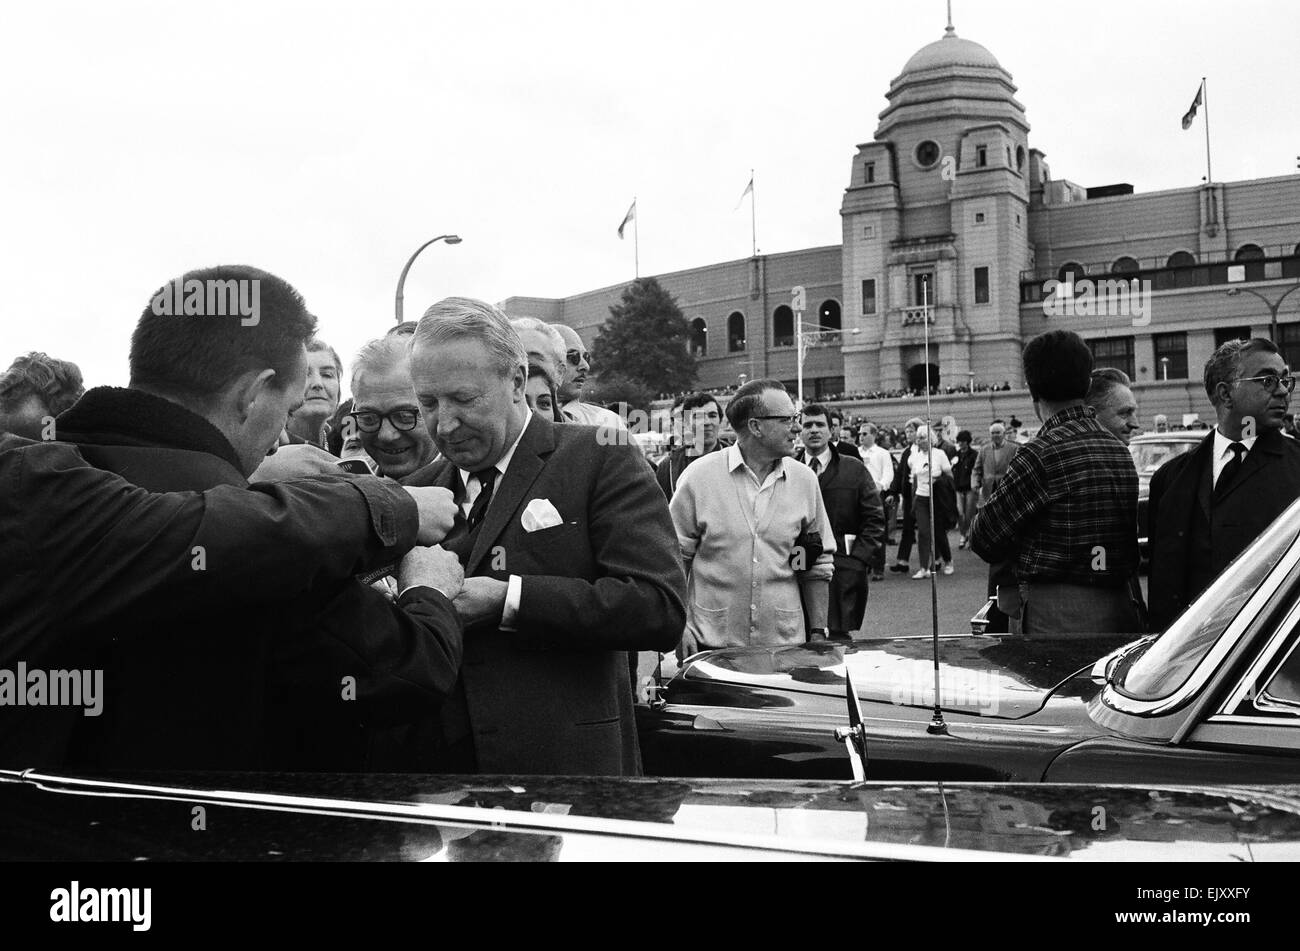 Tory leader Edward Heath signs autographs outside Wembley Stadium on day of World Cup Final, 30th July 1966. Stock Photo